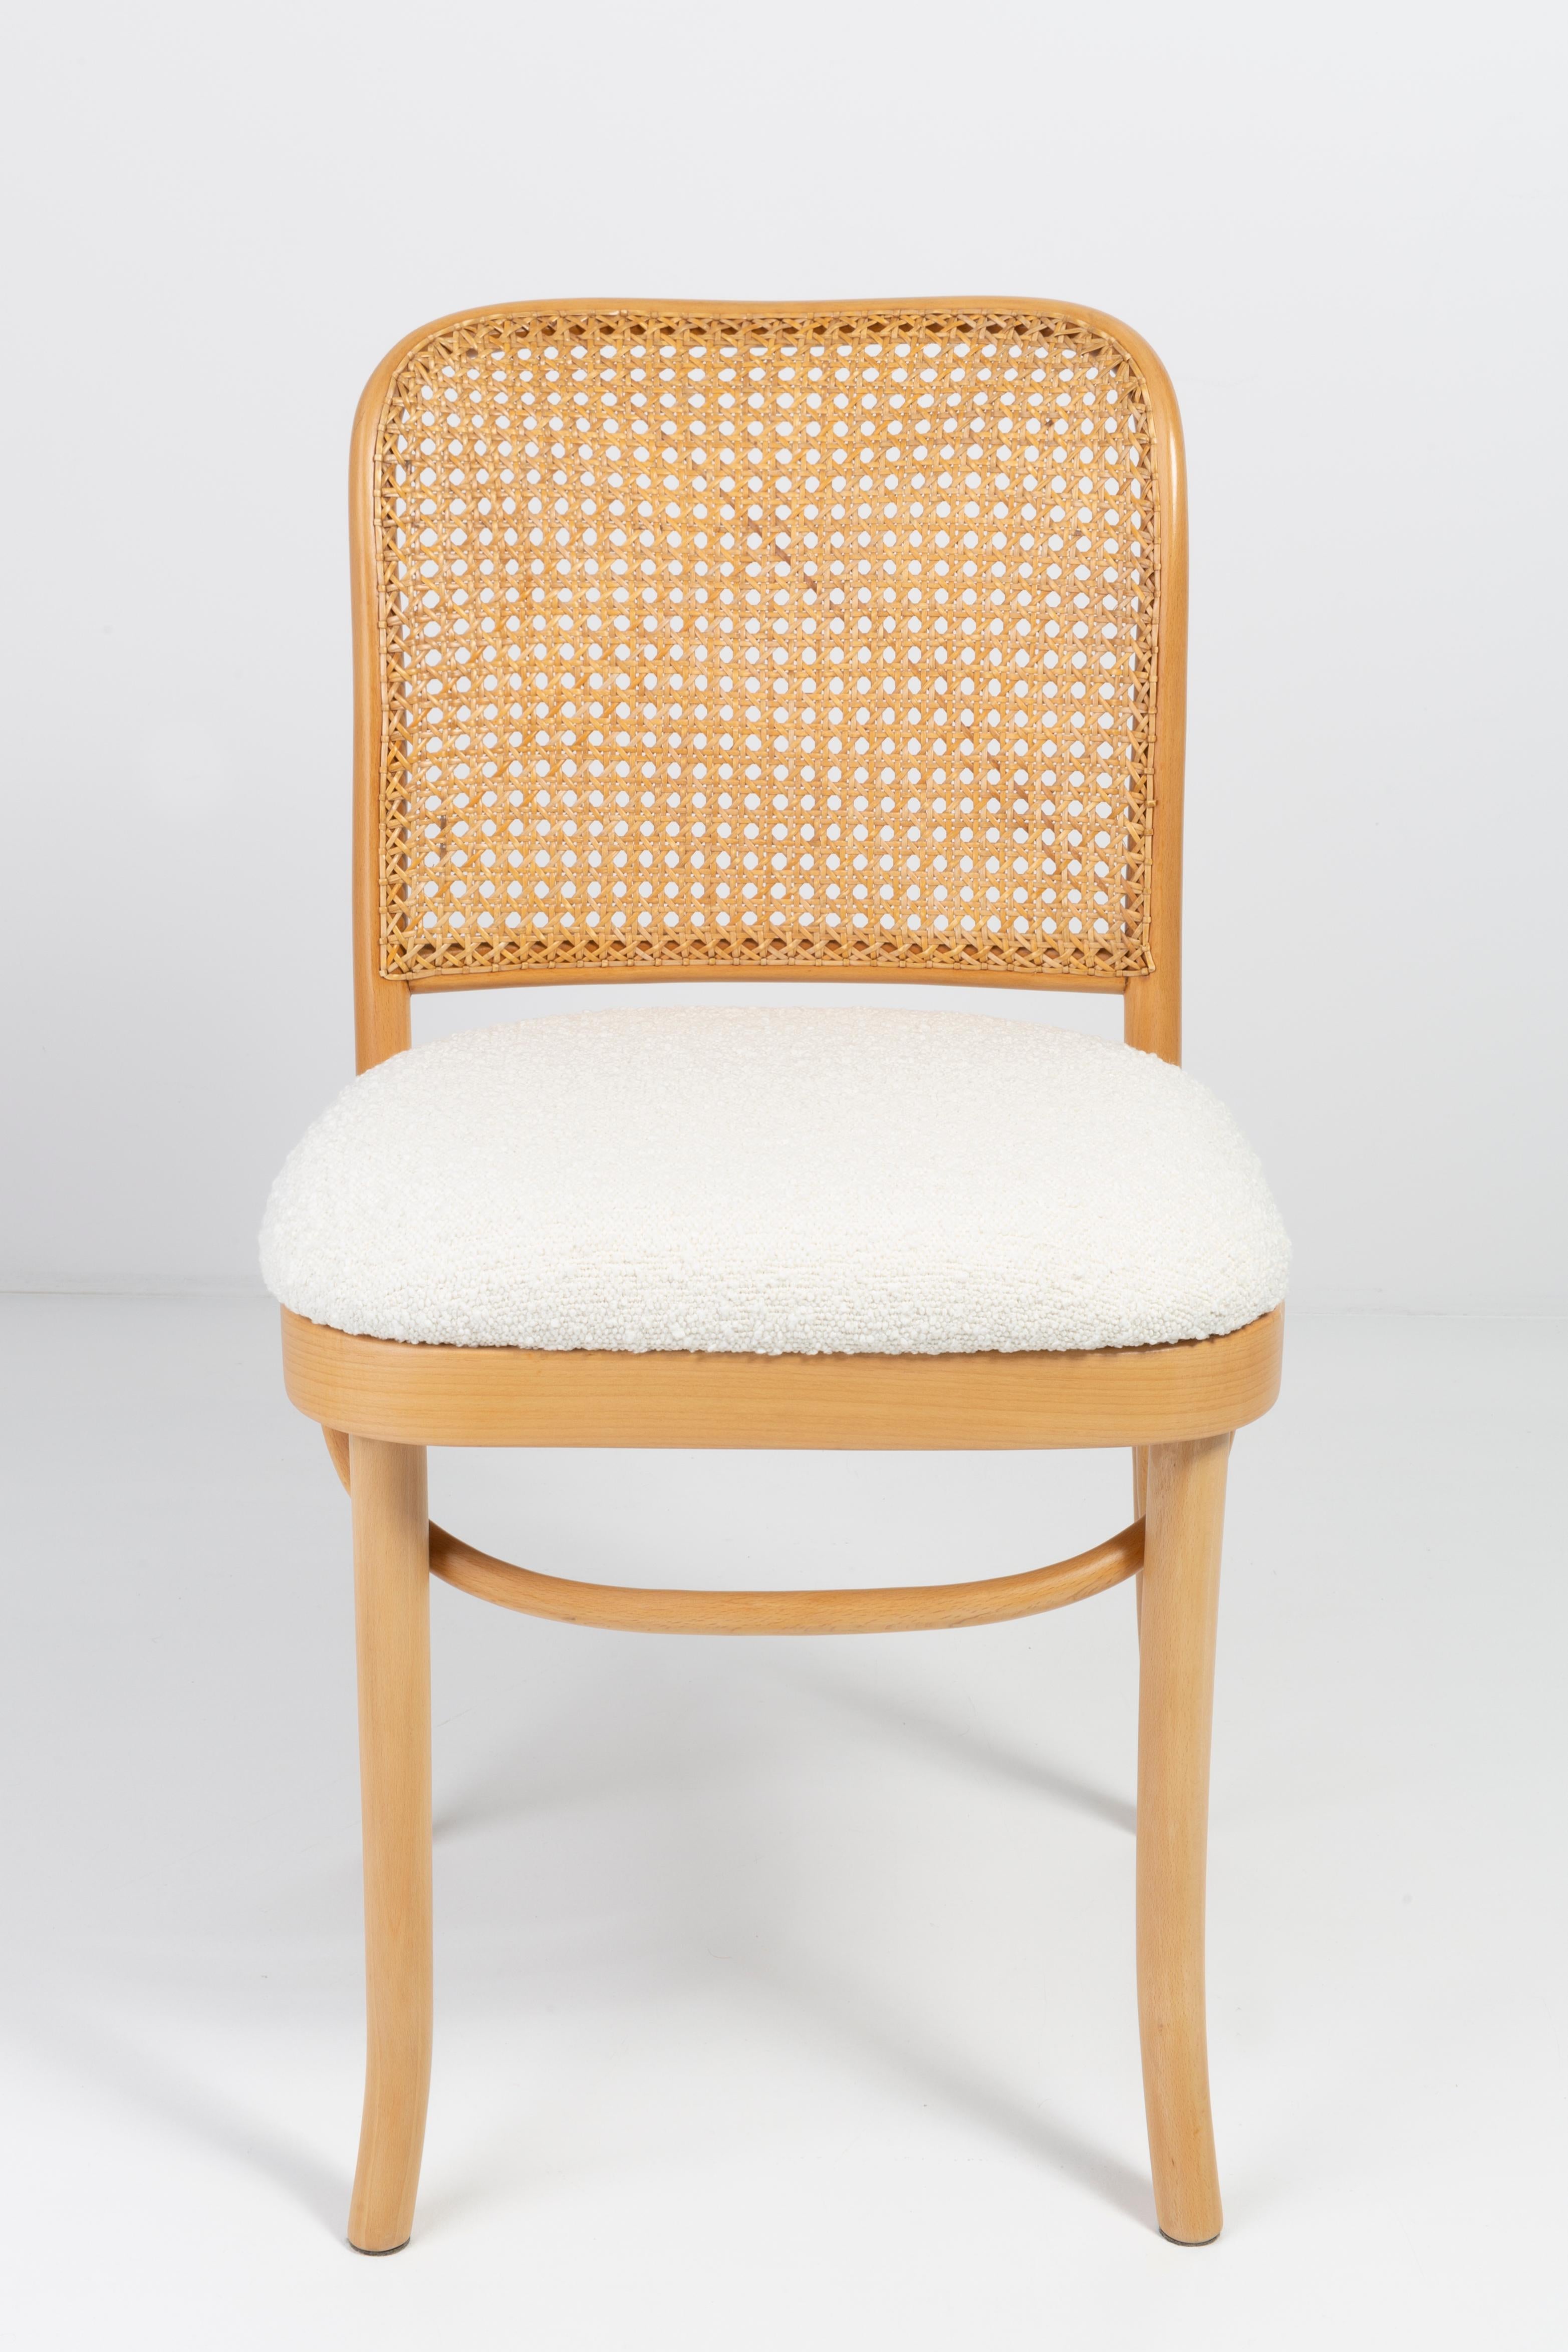 Set of Eight White Boucle Thonet Wood Rattan Chairs, 1960s For Sale 9